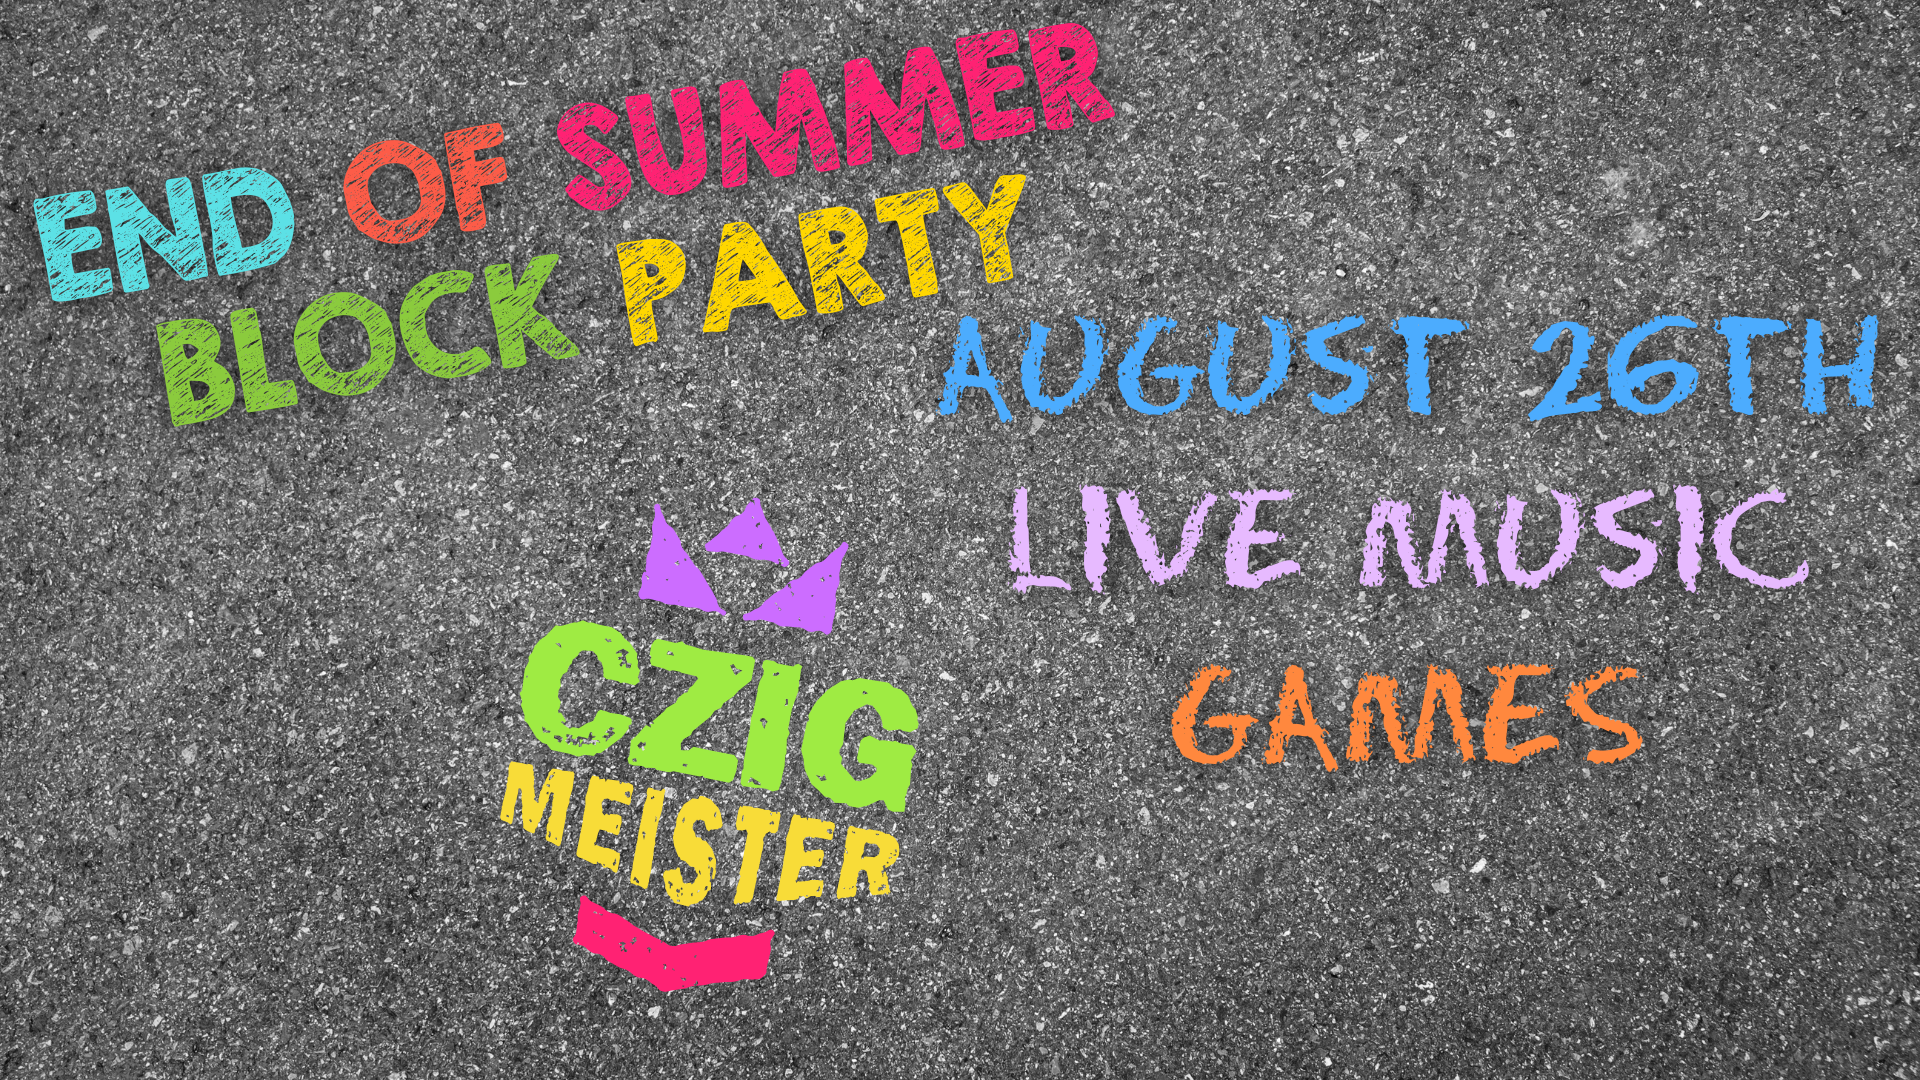 End of Summer Block Party at Czig Meister Brewing Company on August 26th